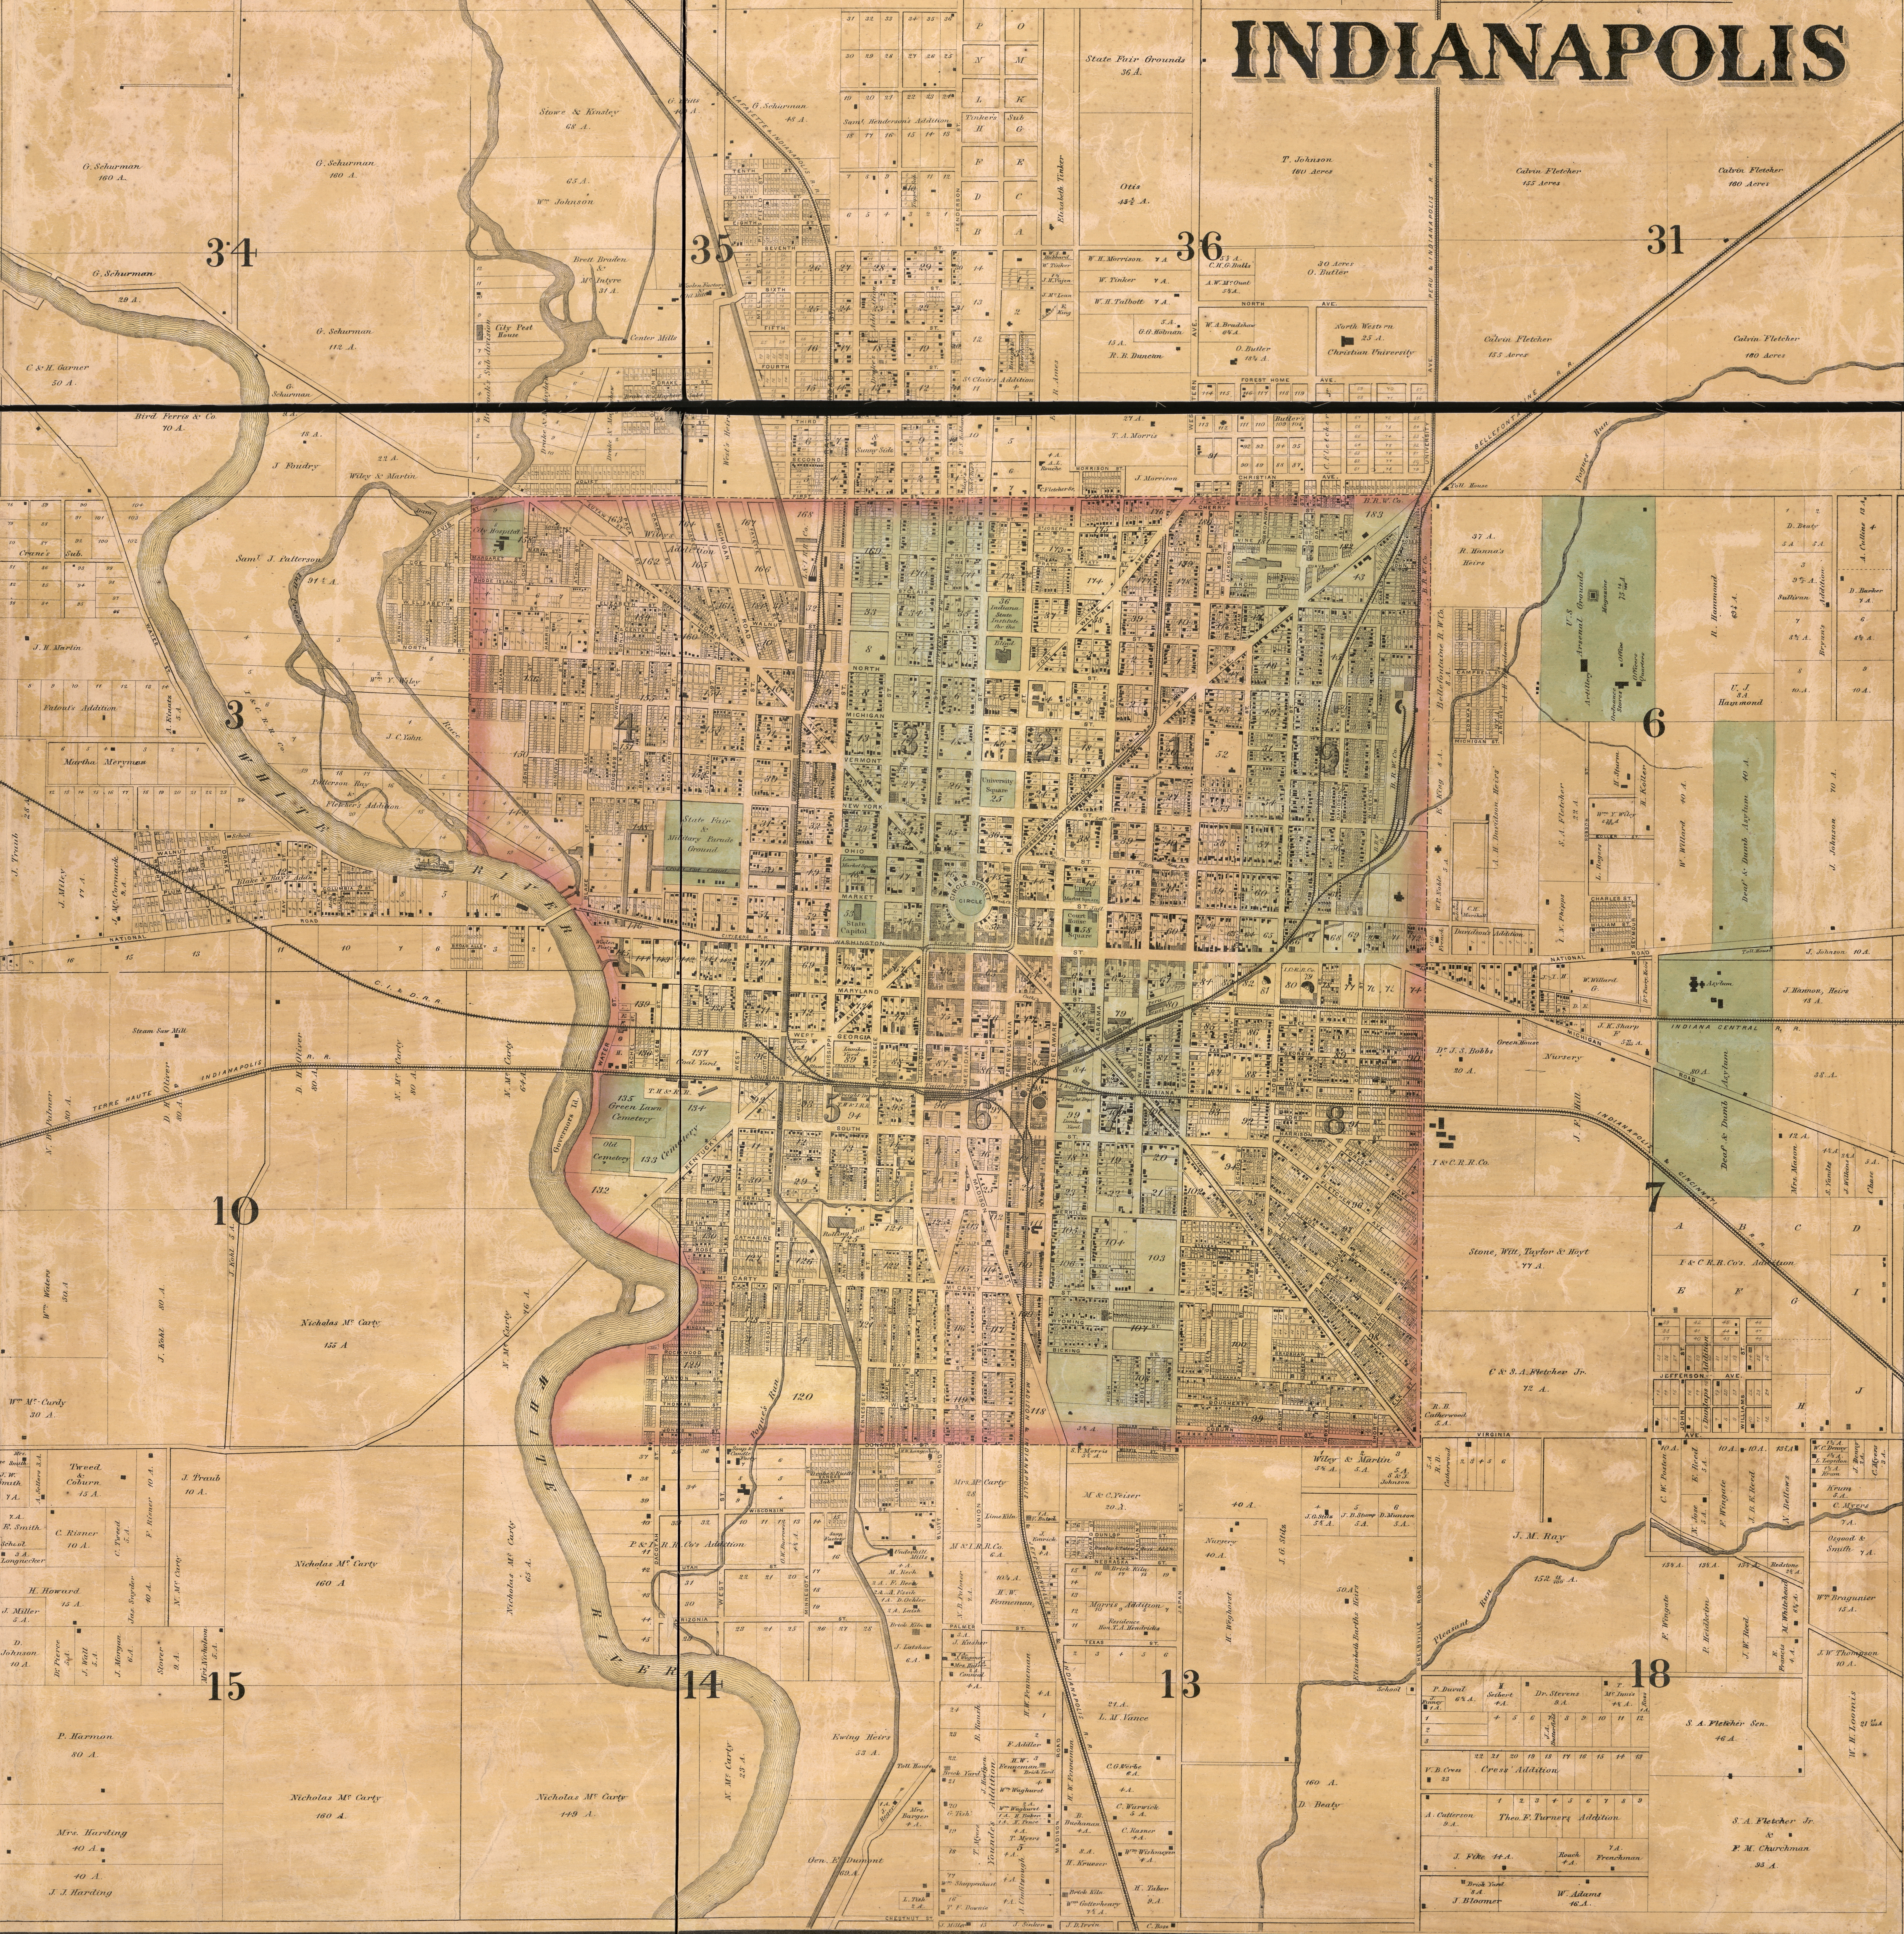 A vintage map of Indianapolis from the 1860s